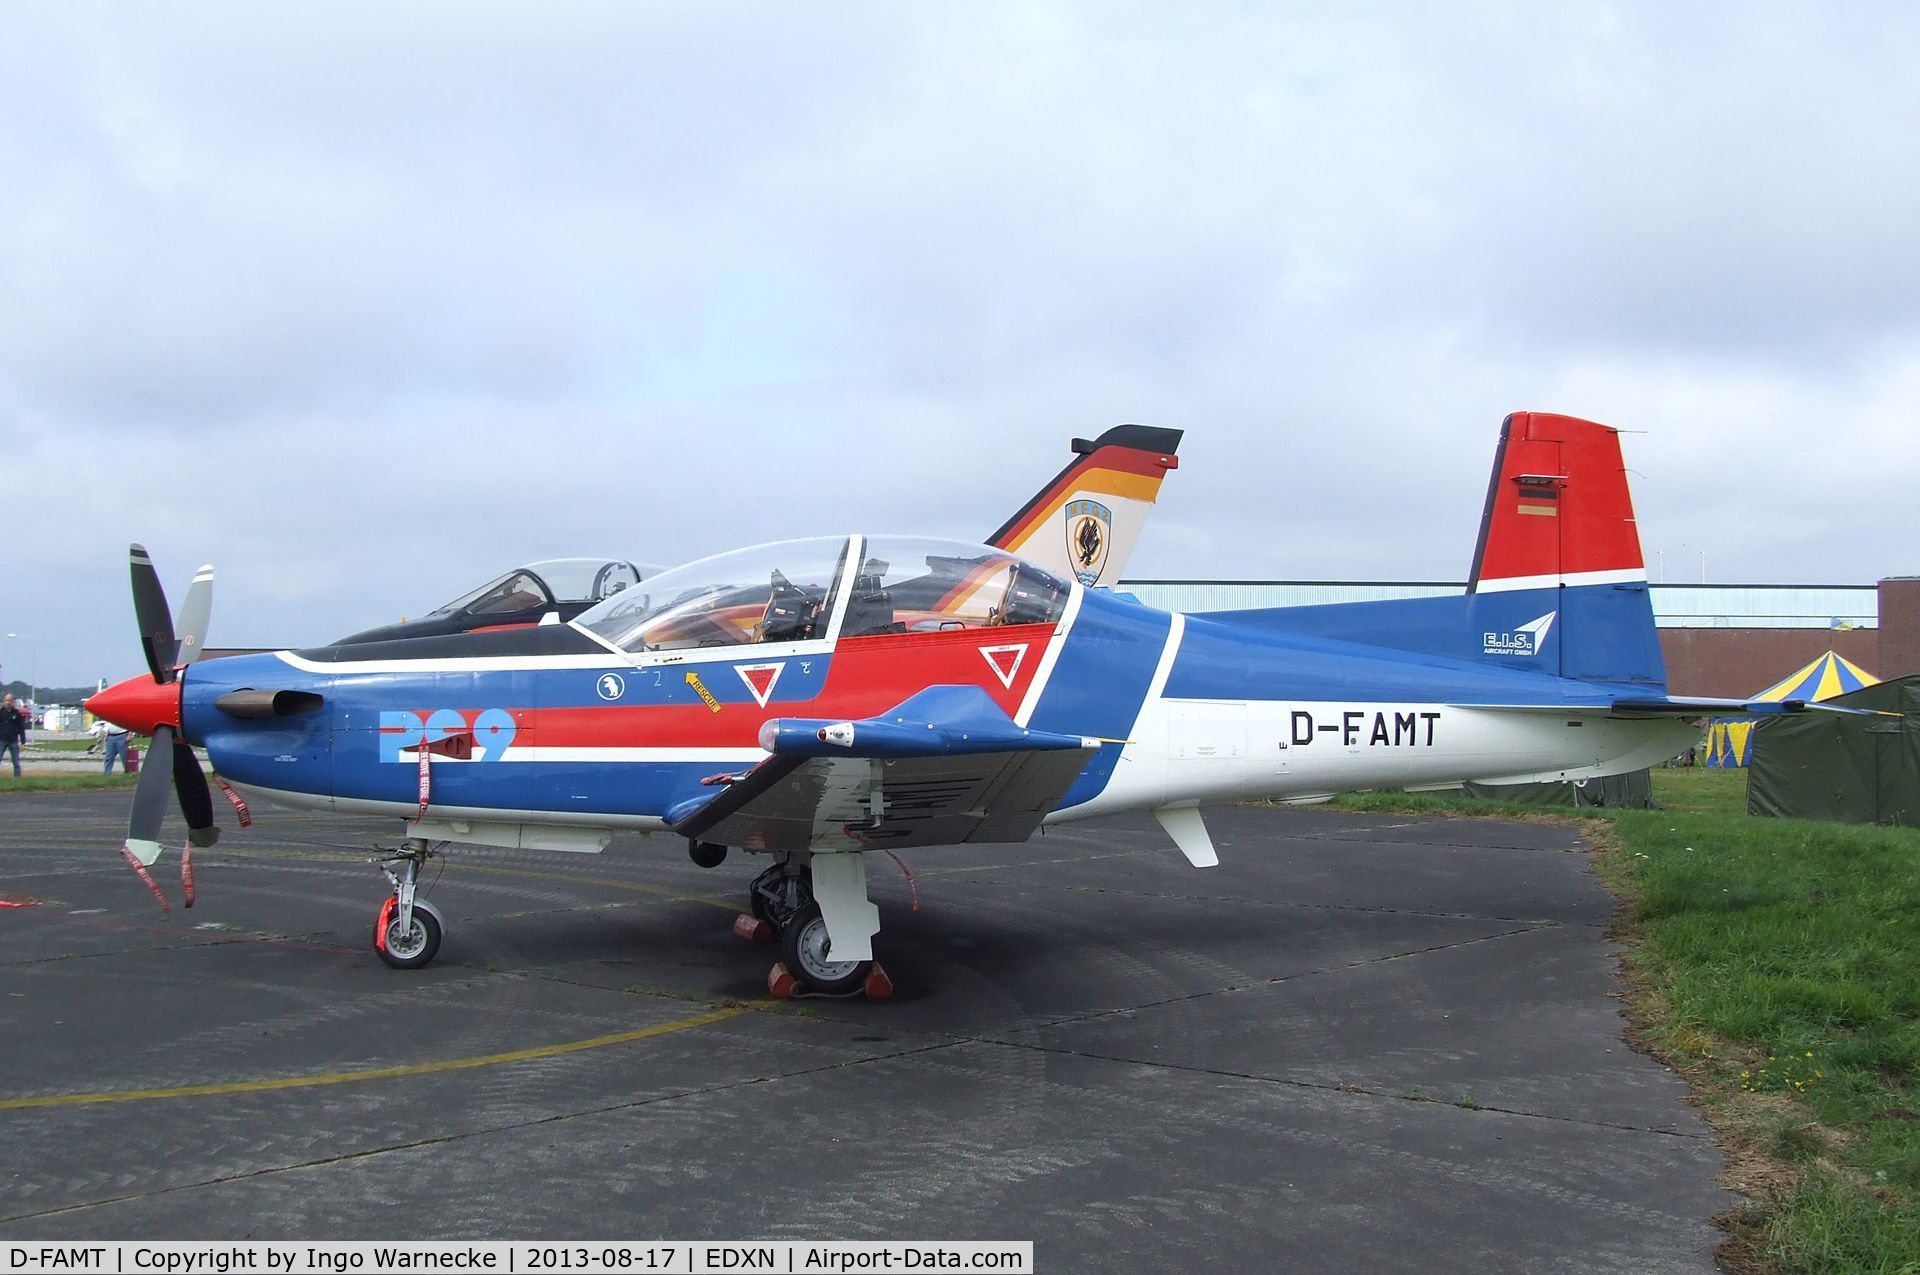 D-FAMT, Pilatus PC-9B C/N 164, Pilatus PC-9B of E.I.S. Aircraft (target services for German armed forces) at the Spottersday of the Nordholz Airday 2013 celebrationg 100 Years of German Naval Aviation at Nordholz Naval Aviation Base